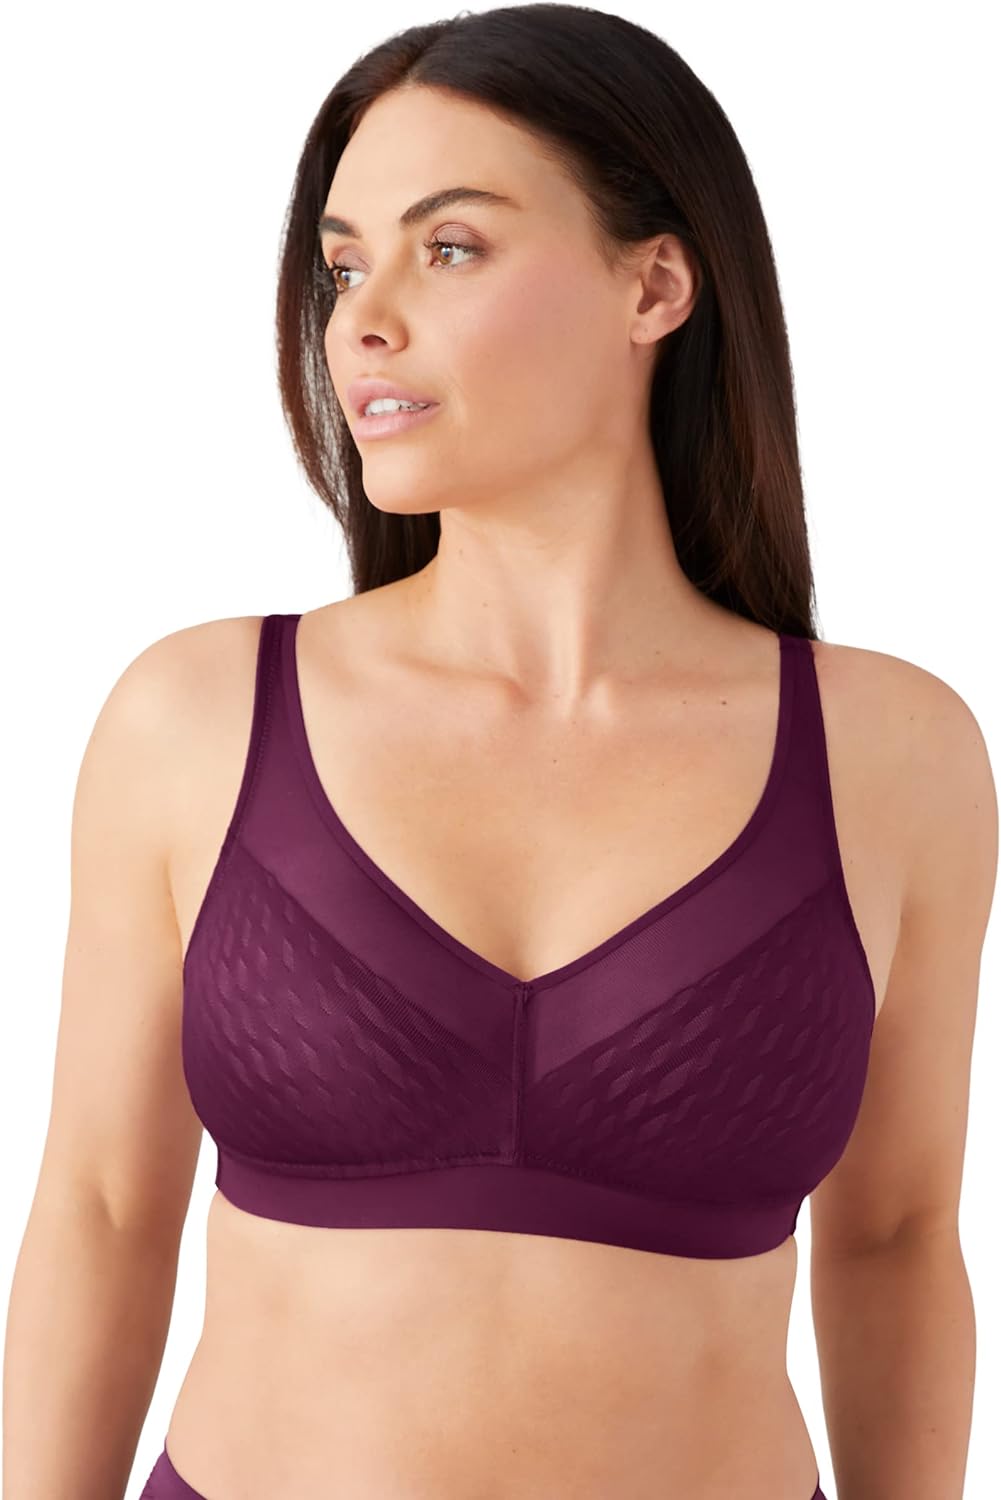 Old Lady Thin Wirefree Bras Full Coverage Underwear Lace Sexy Bralette  Everyday Bras for Middle Elderly Women (Color : Gray Purple, Size : 85/38BC)